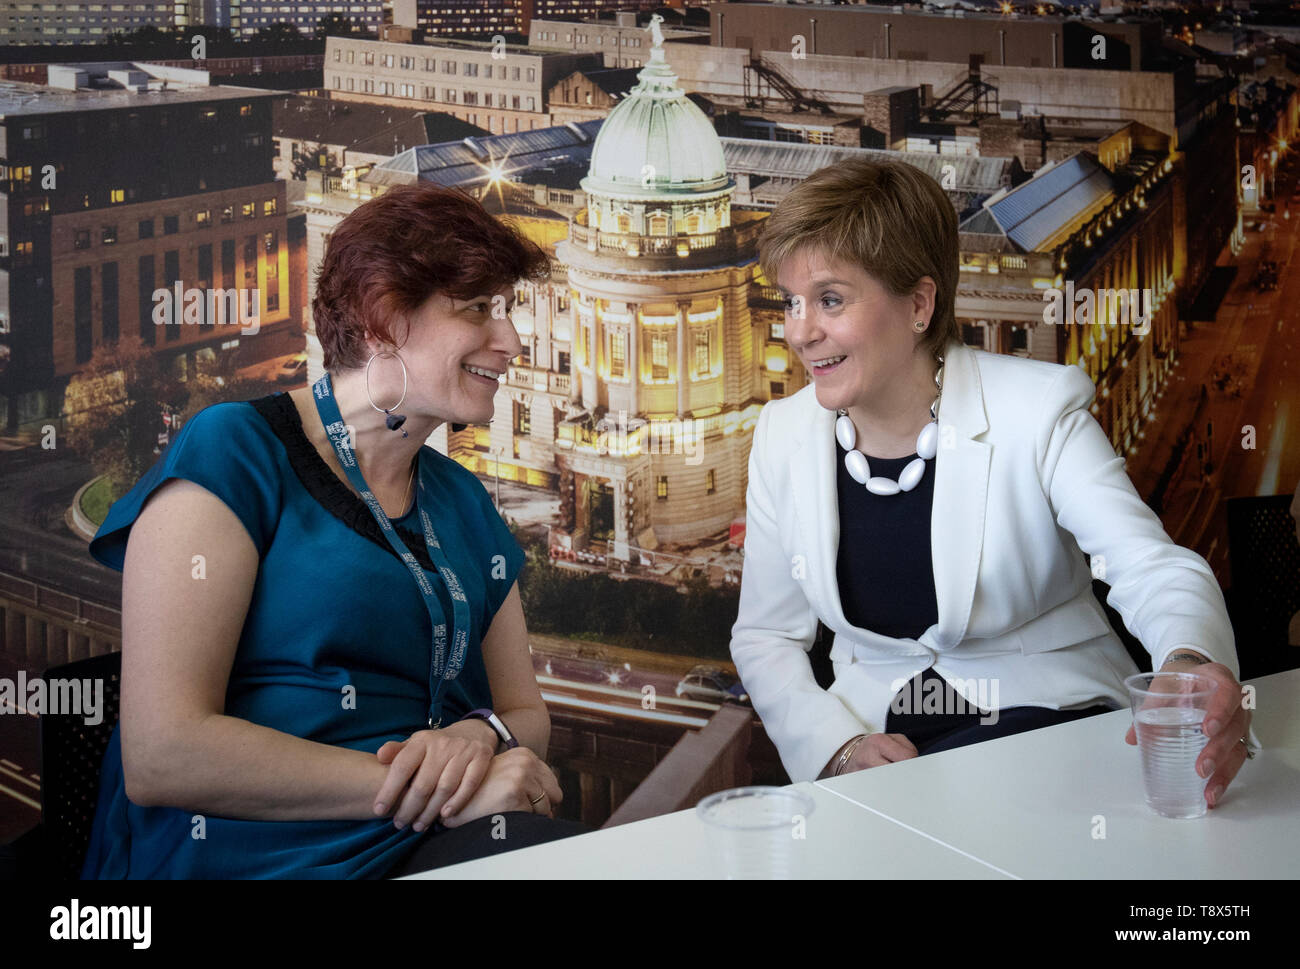 First Minister Nicola Sturgeon (right) with senior lecturer Maria Economou from Greece during a visit to Tay House, Glasgow, where she met with EU nationals working at the University of Glasgow ahead of next week's European election. Stock Photo